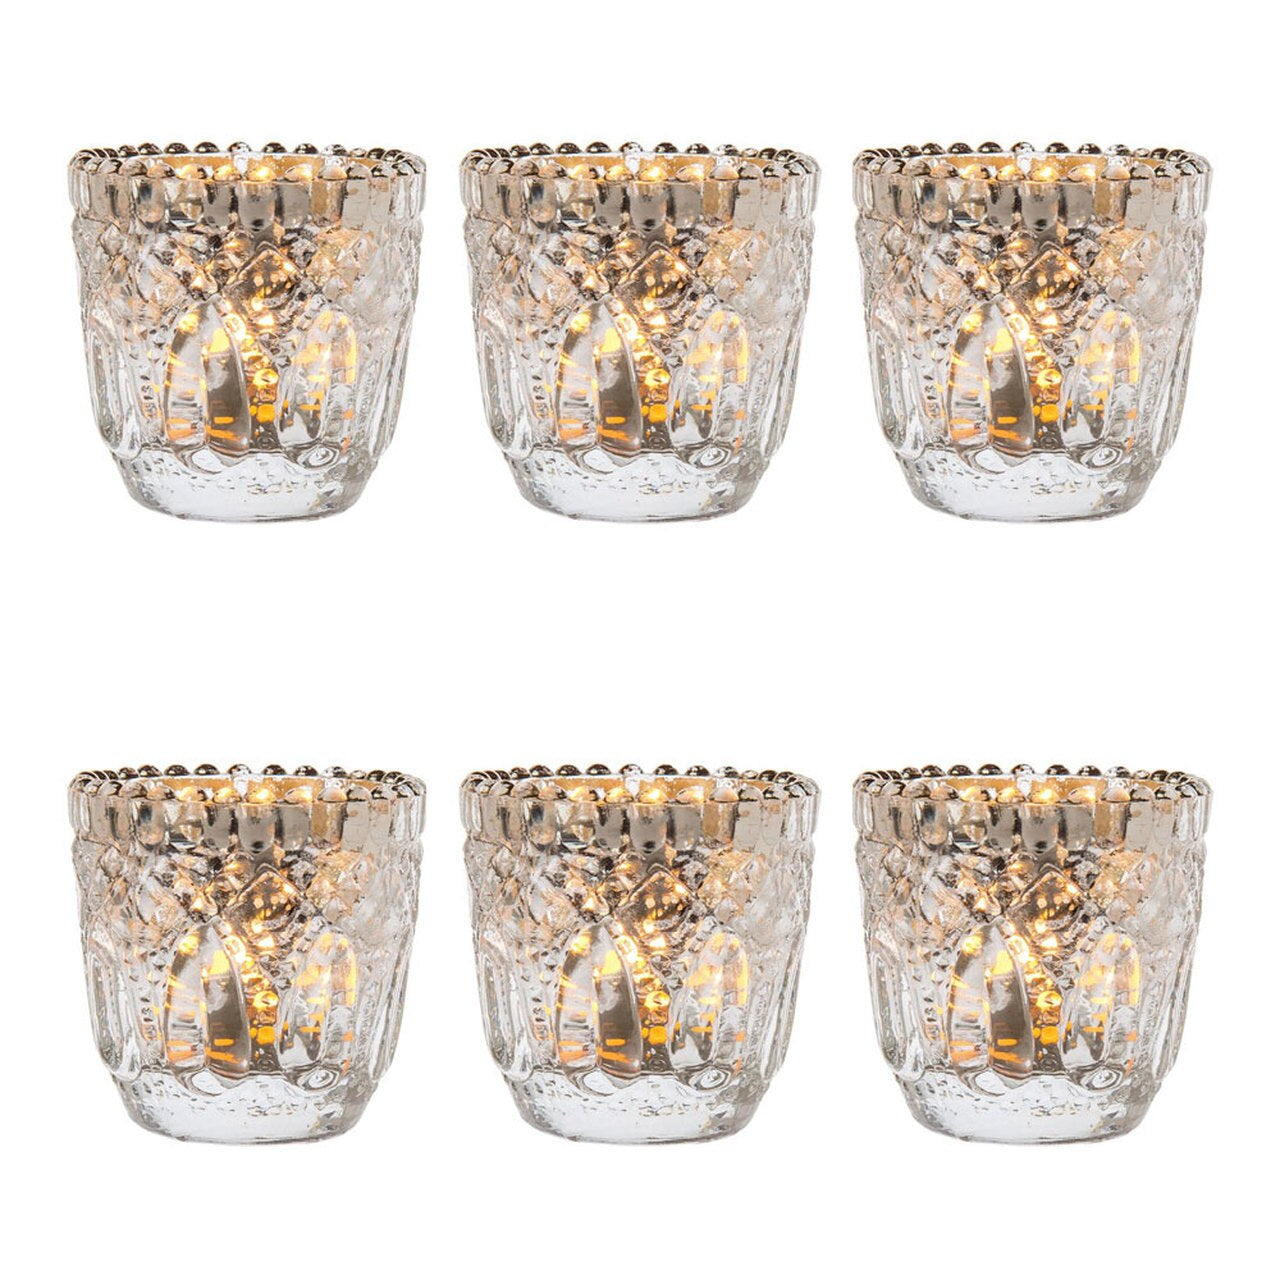 6 Pack | Faceted Vintage Mercury Glass Candle Holders (2.75-Inches, Lillian Design, Silver) - For Use with Tea Lights - For Home Decor, Parties and Wedding Decorations - PaperLanternStore.com - Paper Lanterns, Decor, Party Lights & More